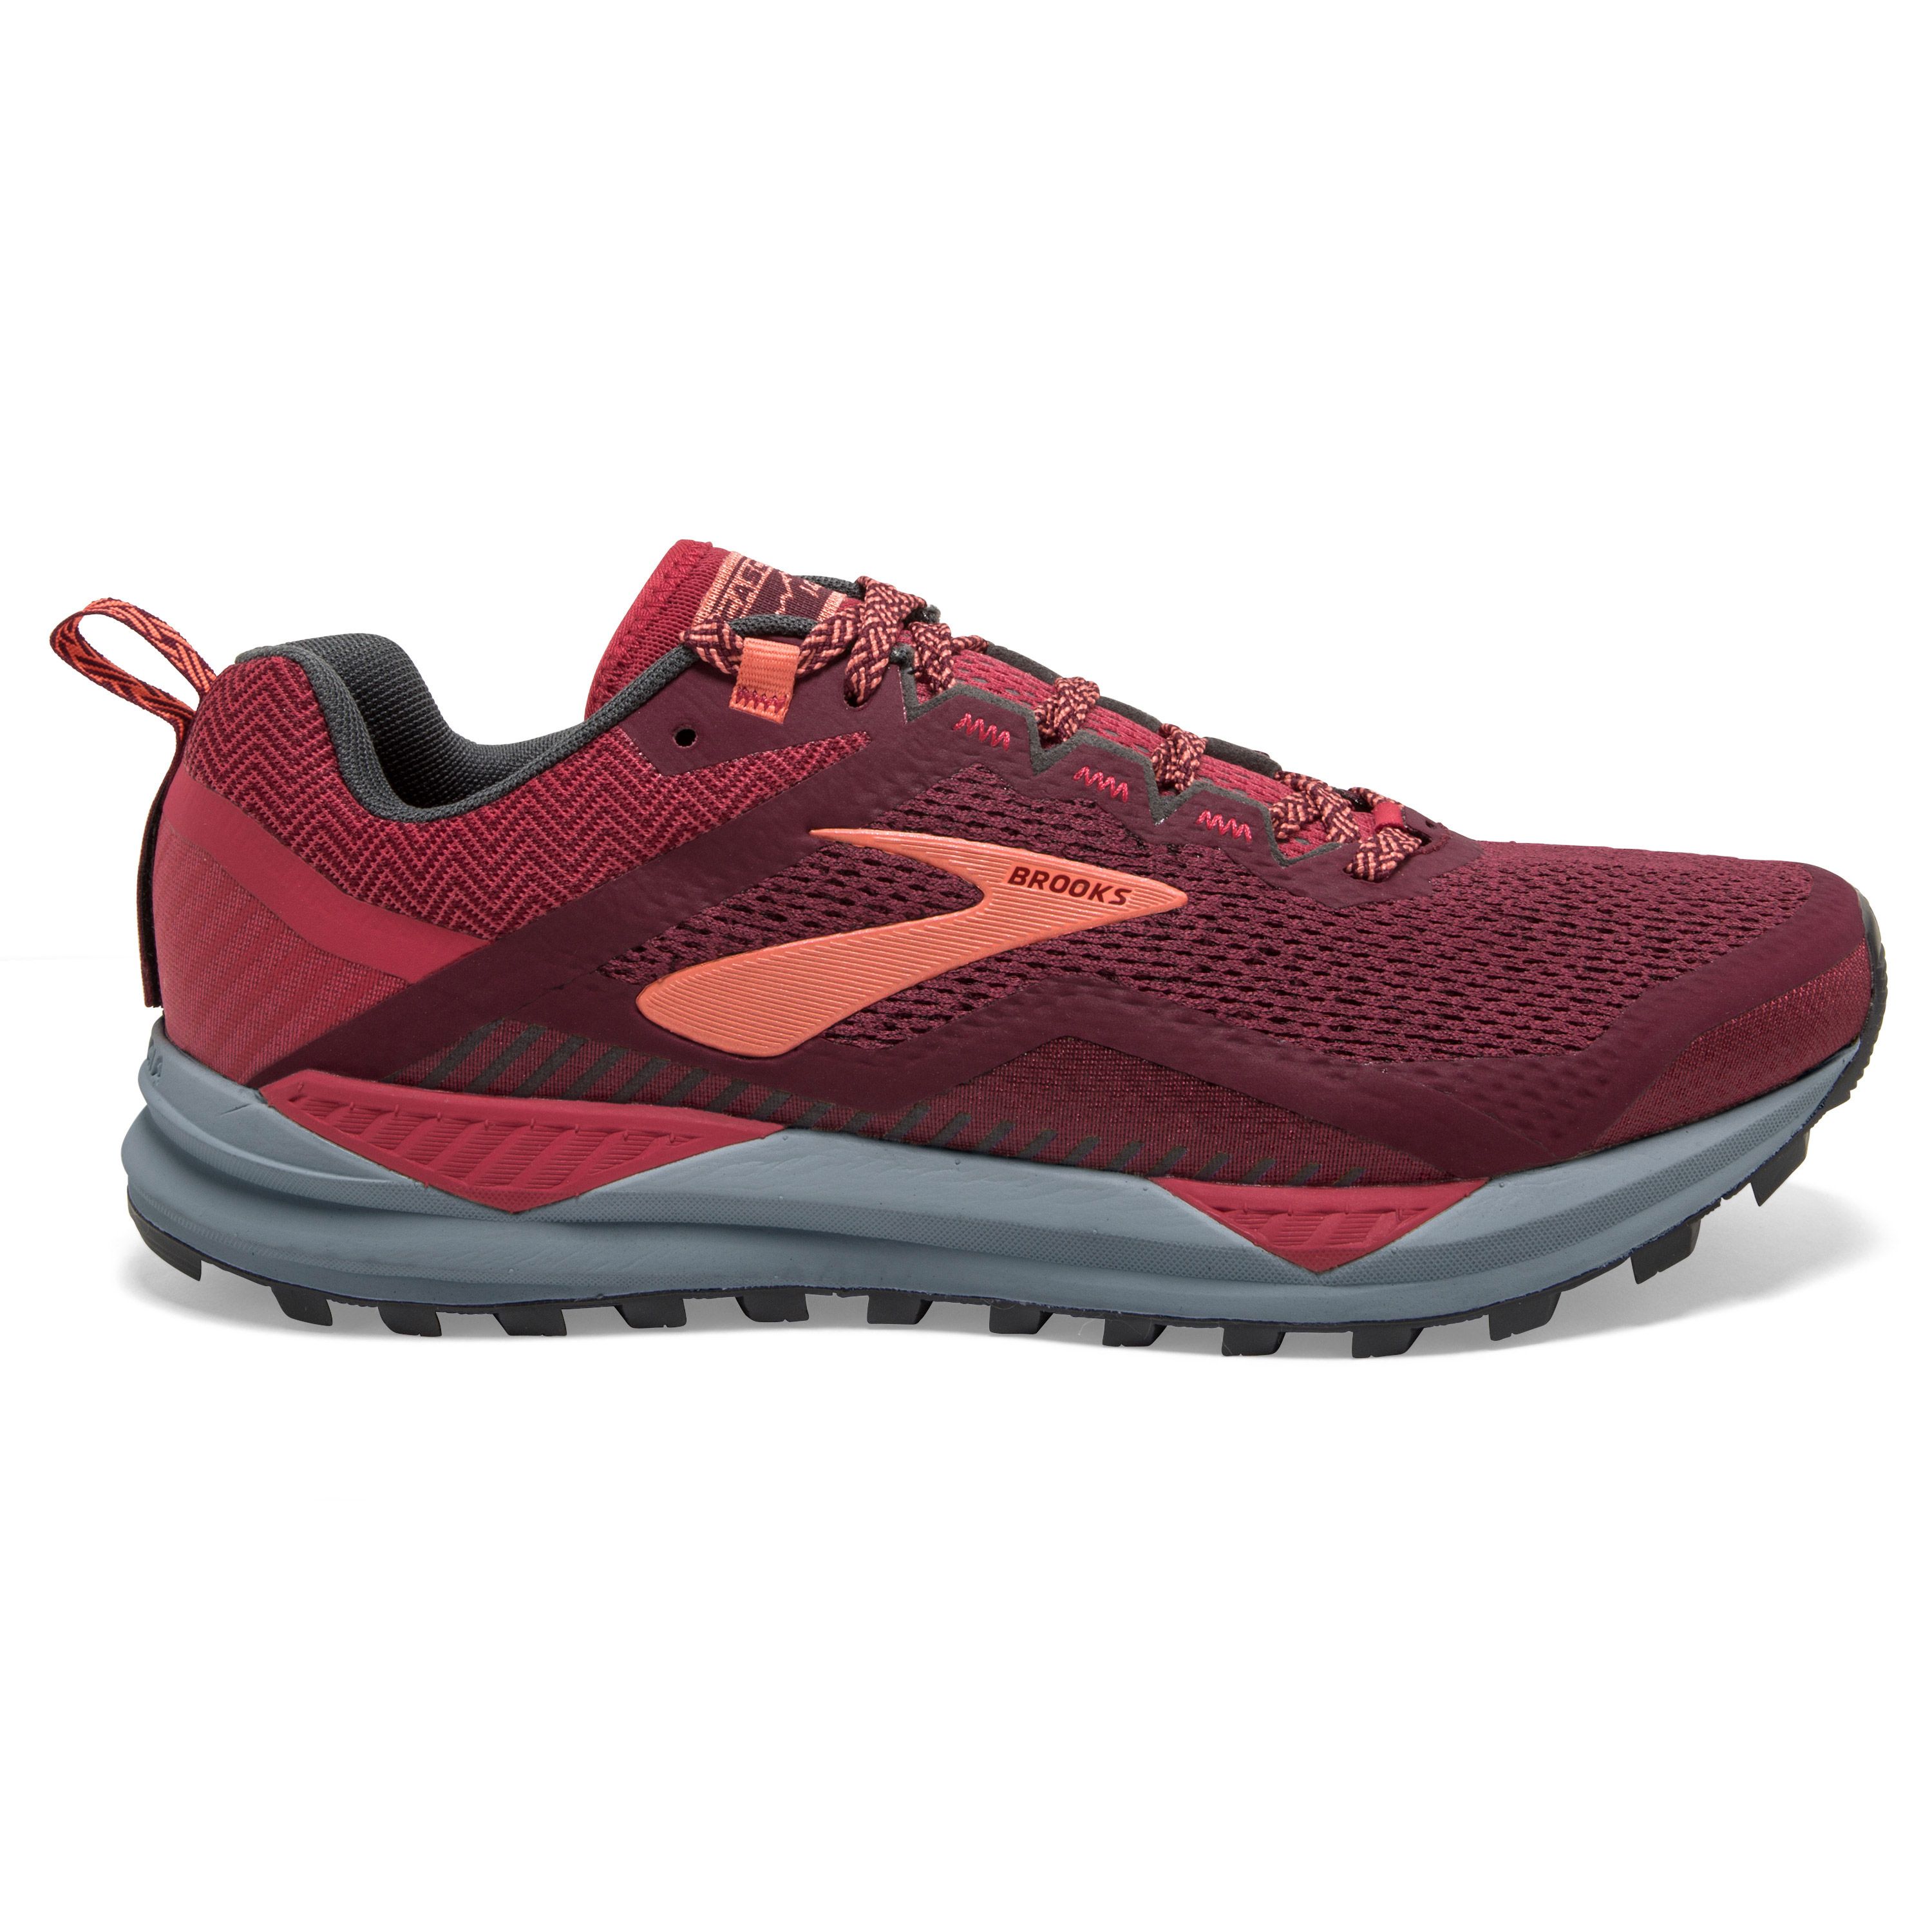 Chaussure de Trail Cascadia 14 - Red Teaberry Coral